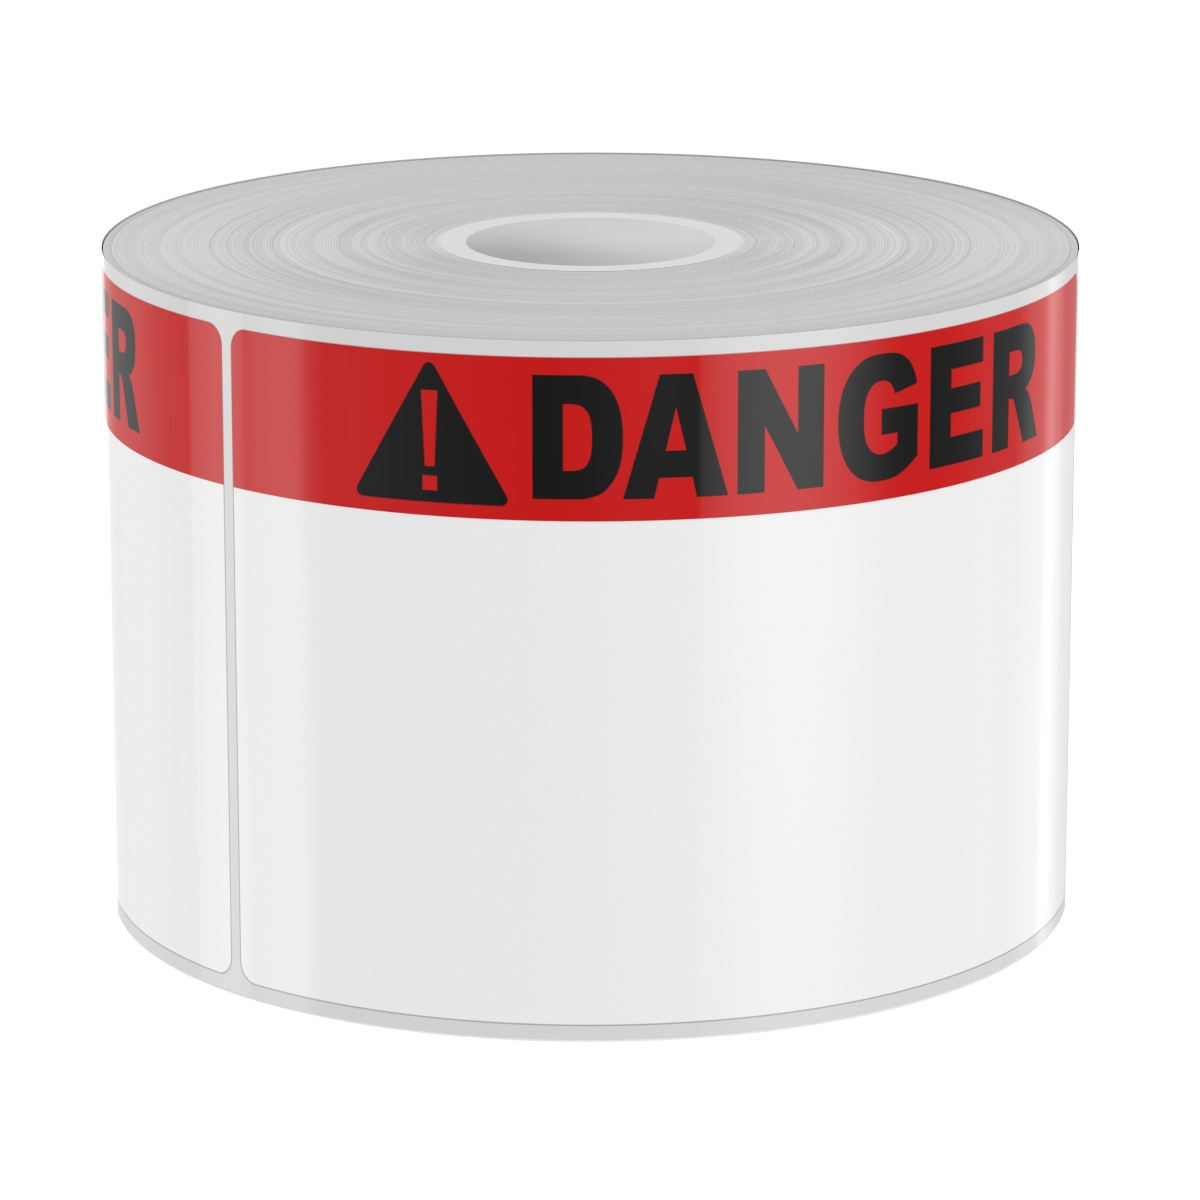 Ask a question about 250 3" x 5" High-Performance Red Band with Black Danger